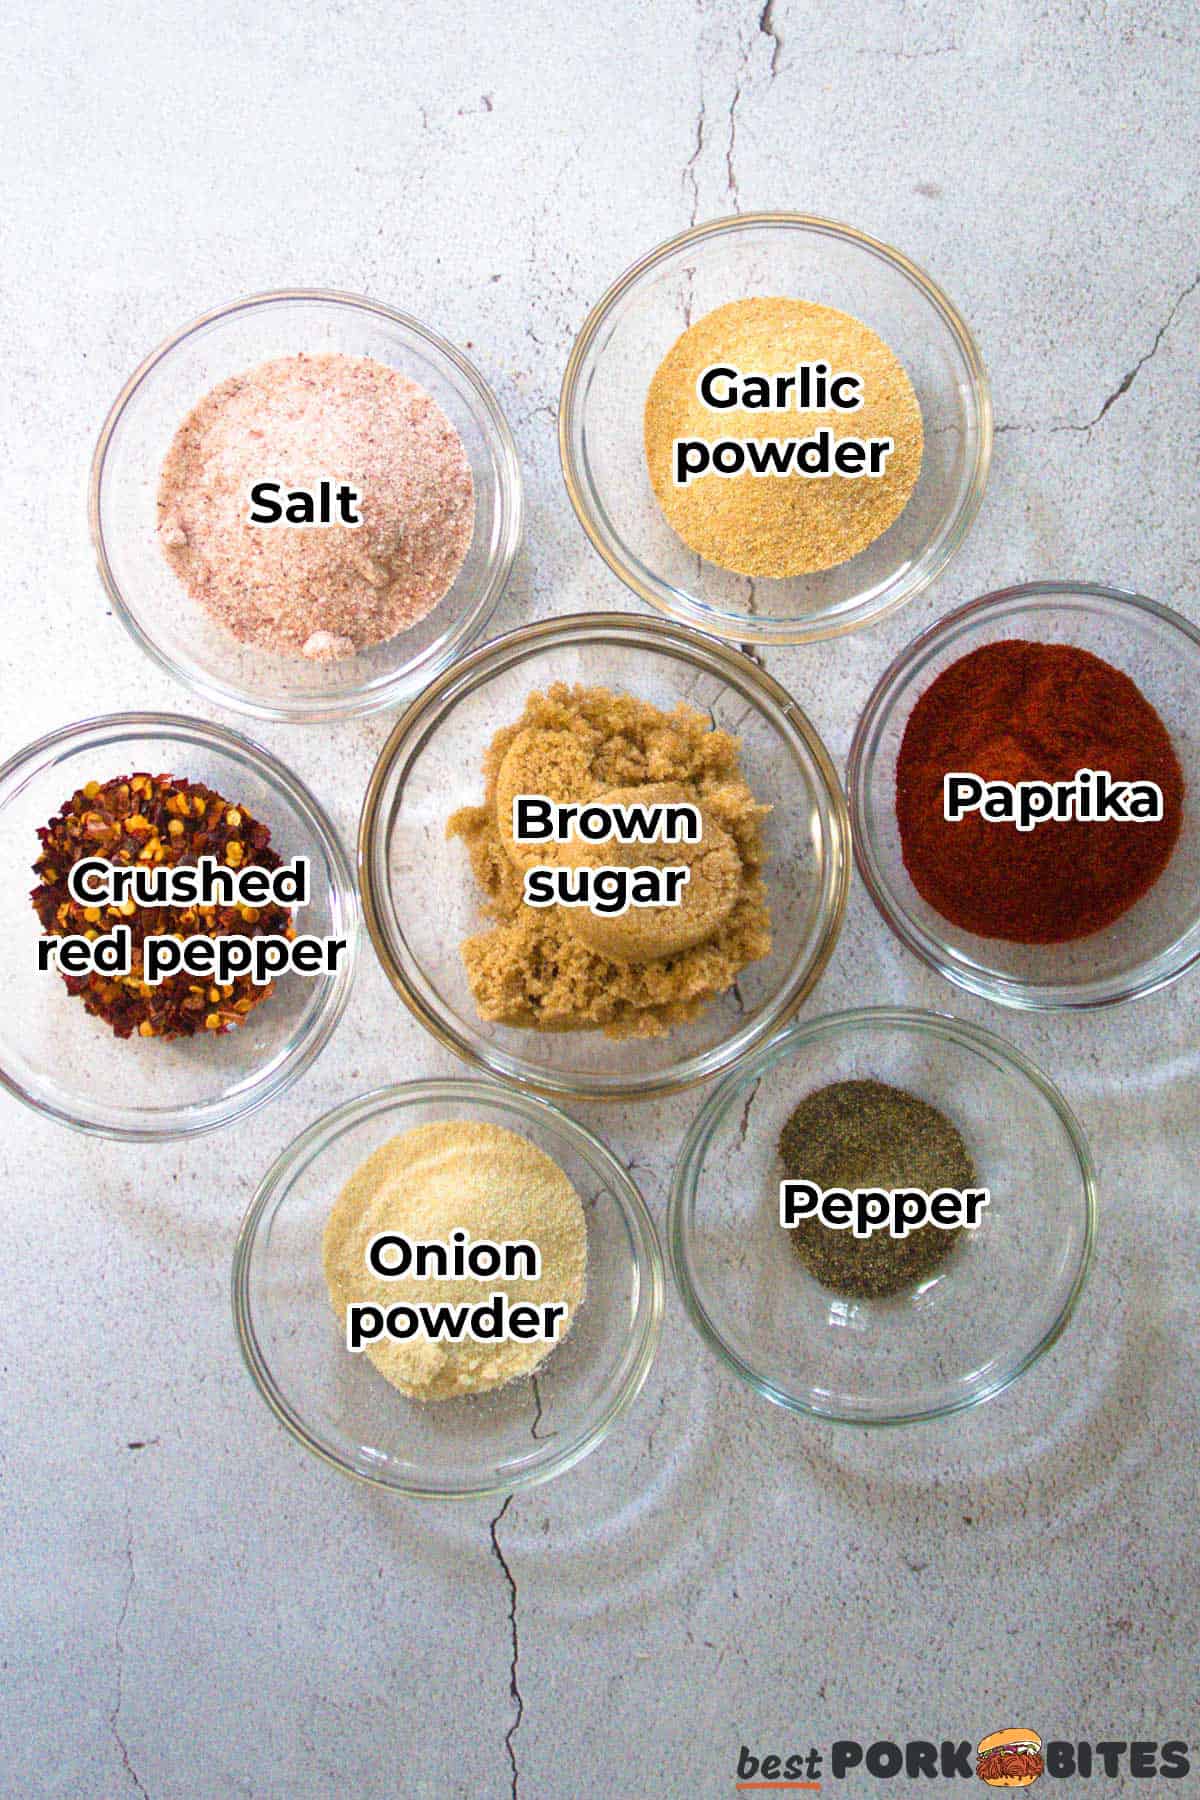 the ingredients for pork chop seasoning in separate glass dishes with labels